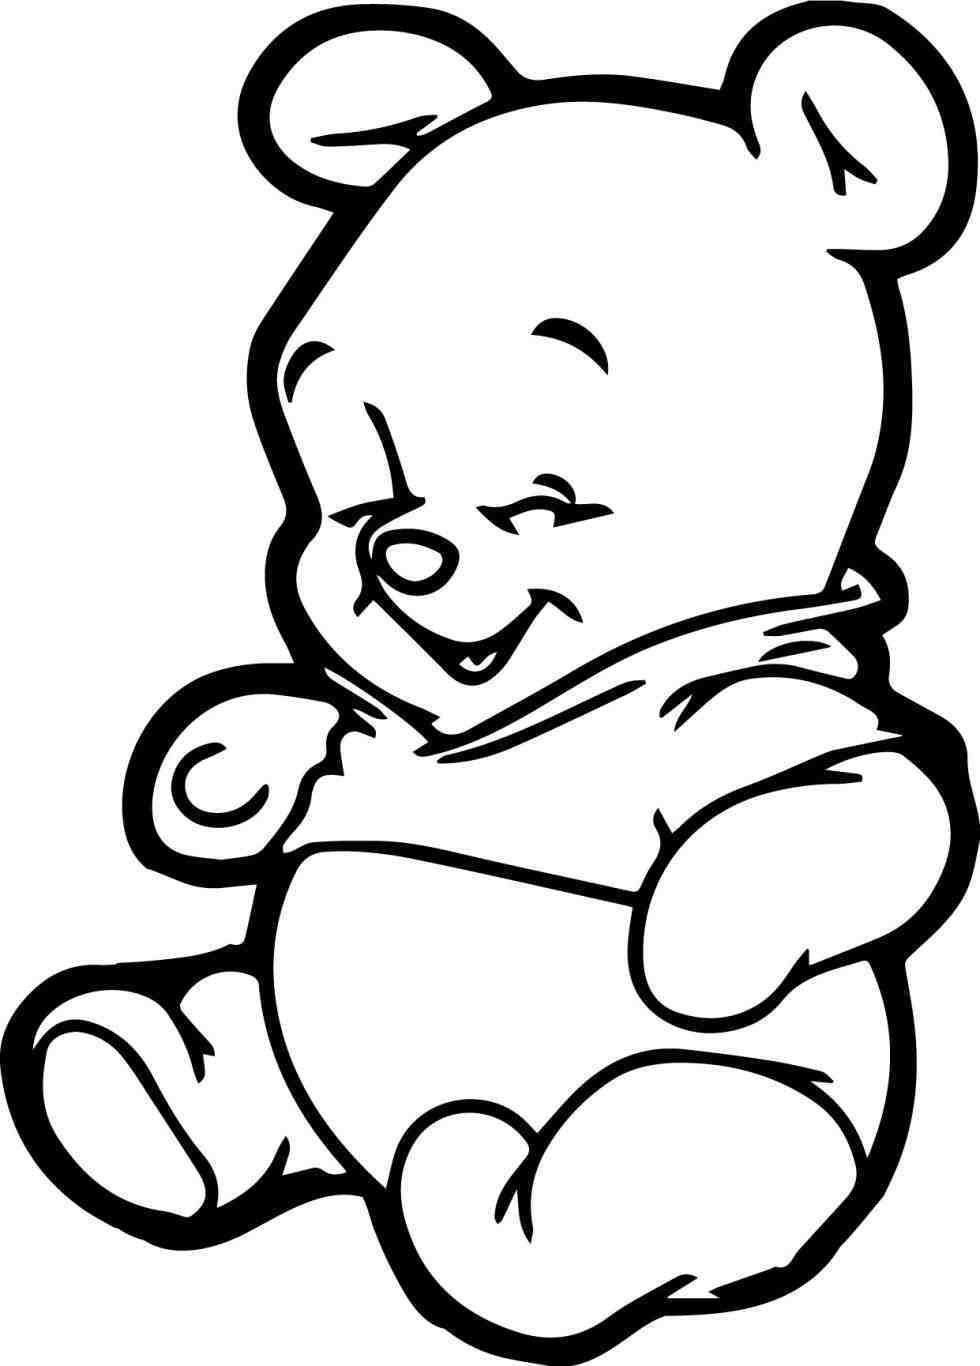 Best How To Draw A Pooh of all time The ultimate guide